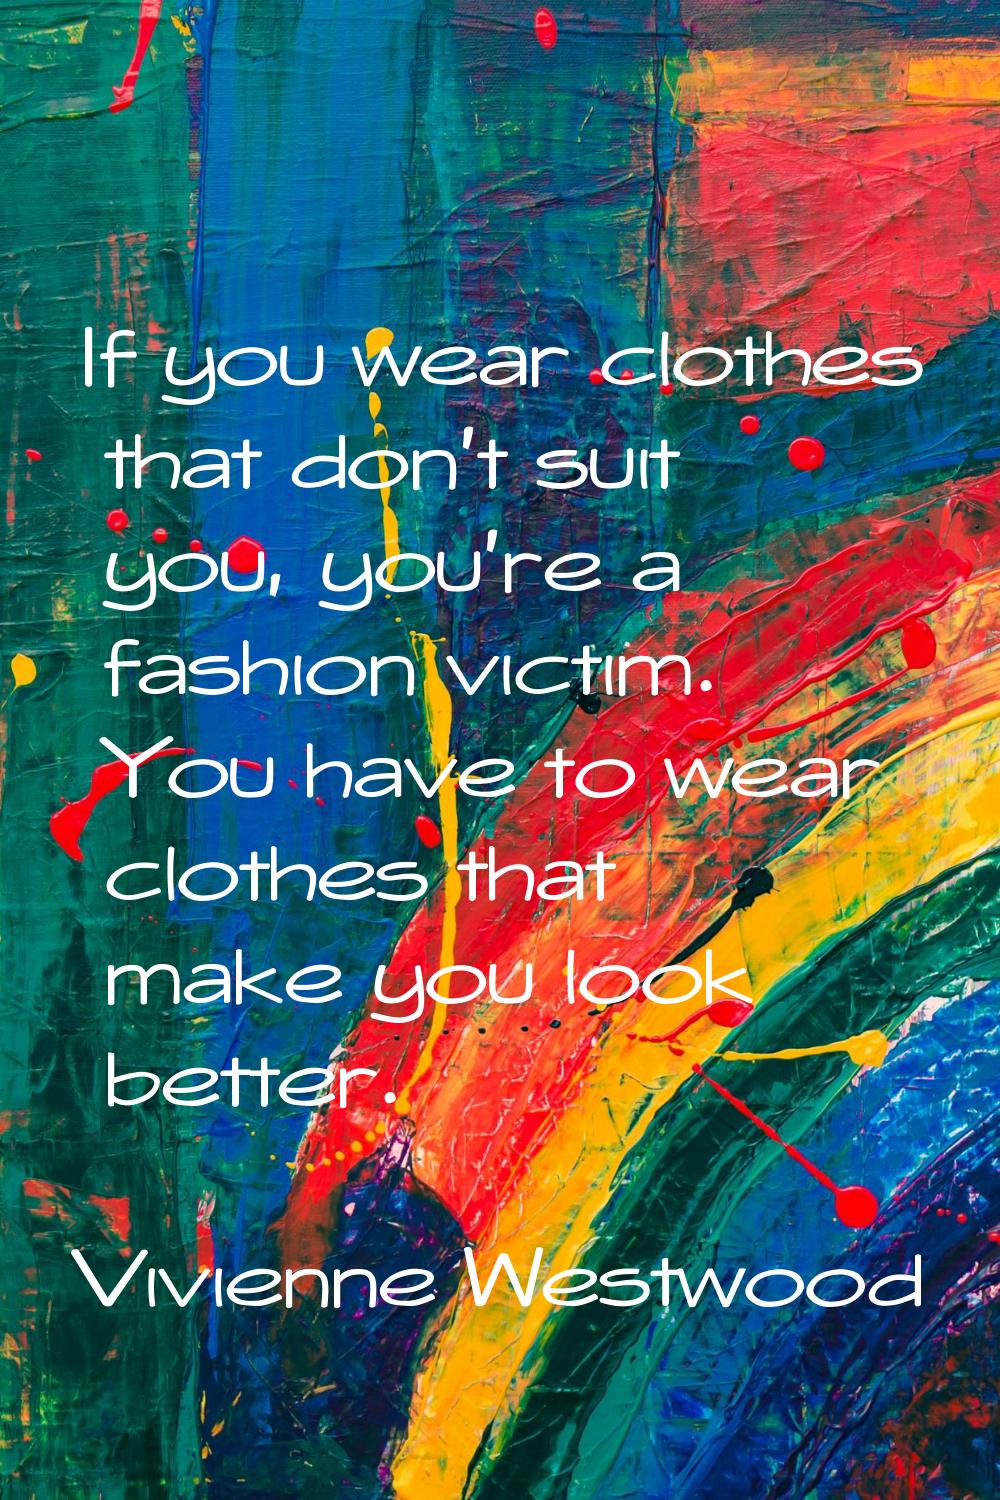 If you wear clothes that don't suit you, you're a fashion victim. You have to wear clothes that mak